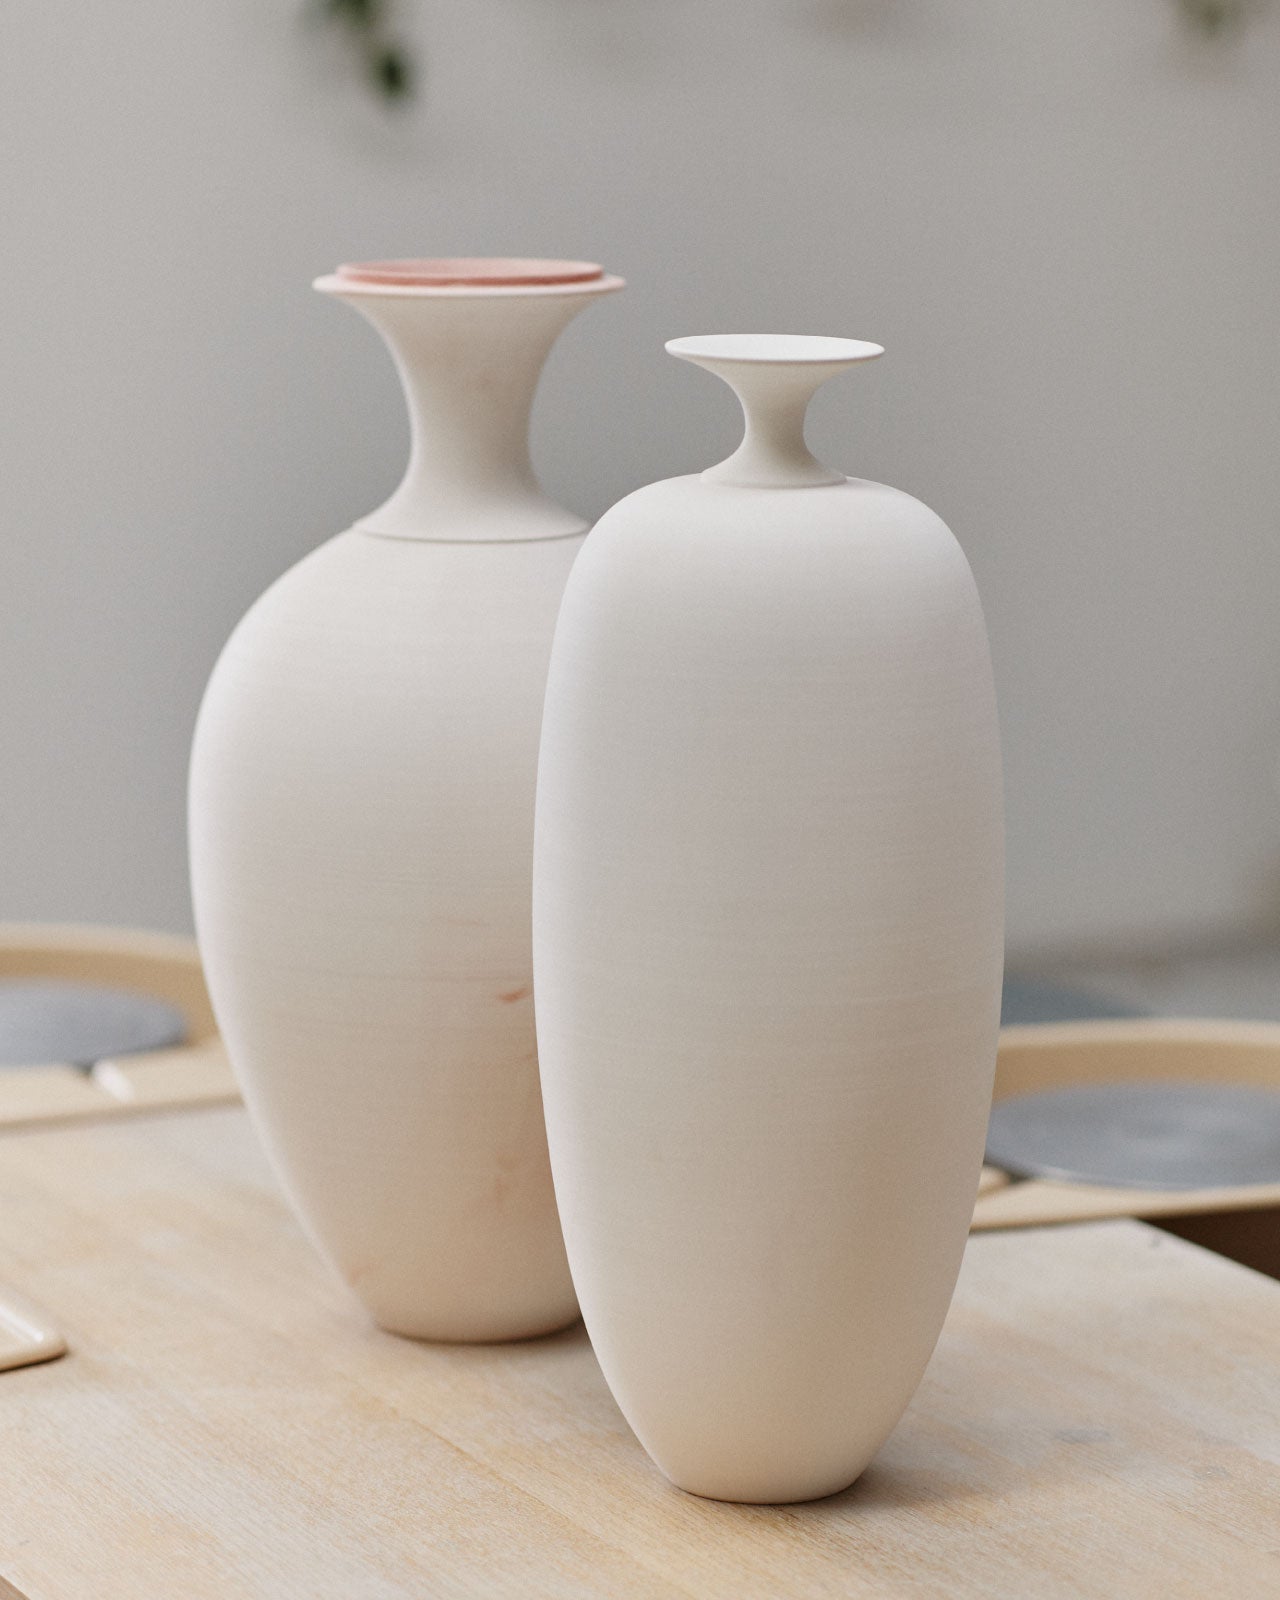 Advanced Ceramics | Throwing 2-Piece Pots with Bill Powell